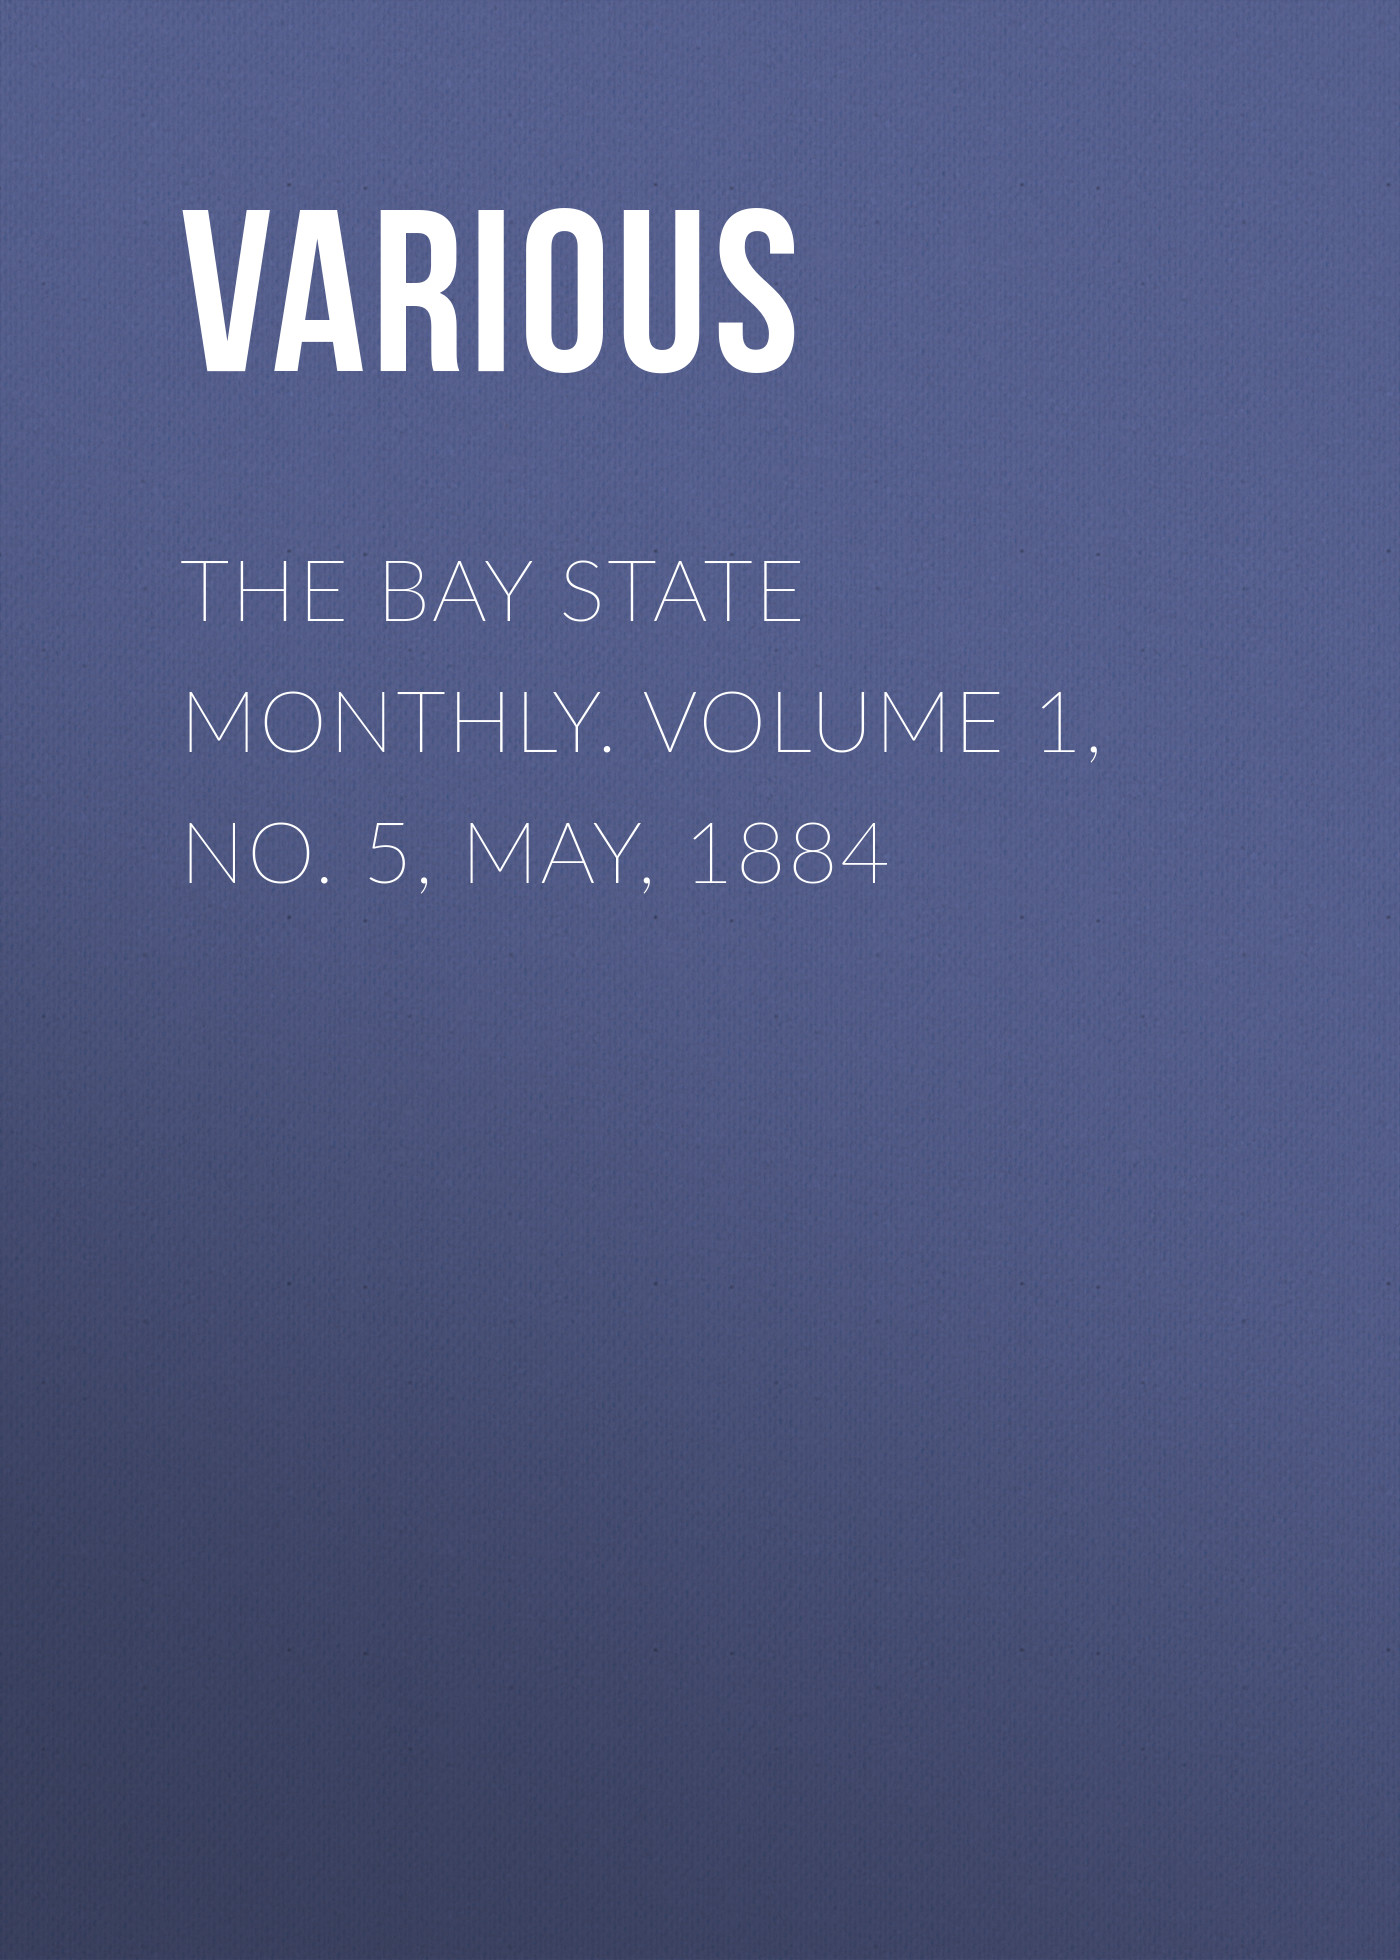 The Bay State Monthly. Volume 1, No. 5, May, 1884